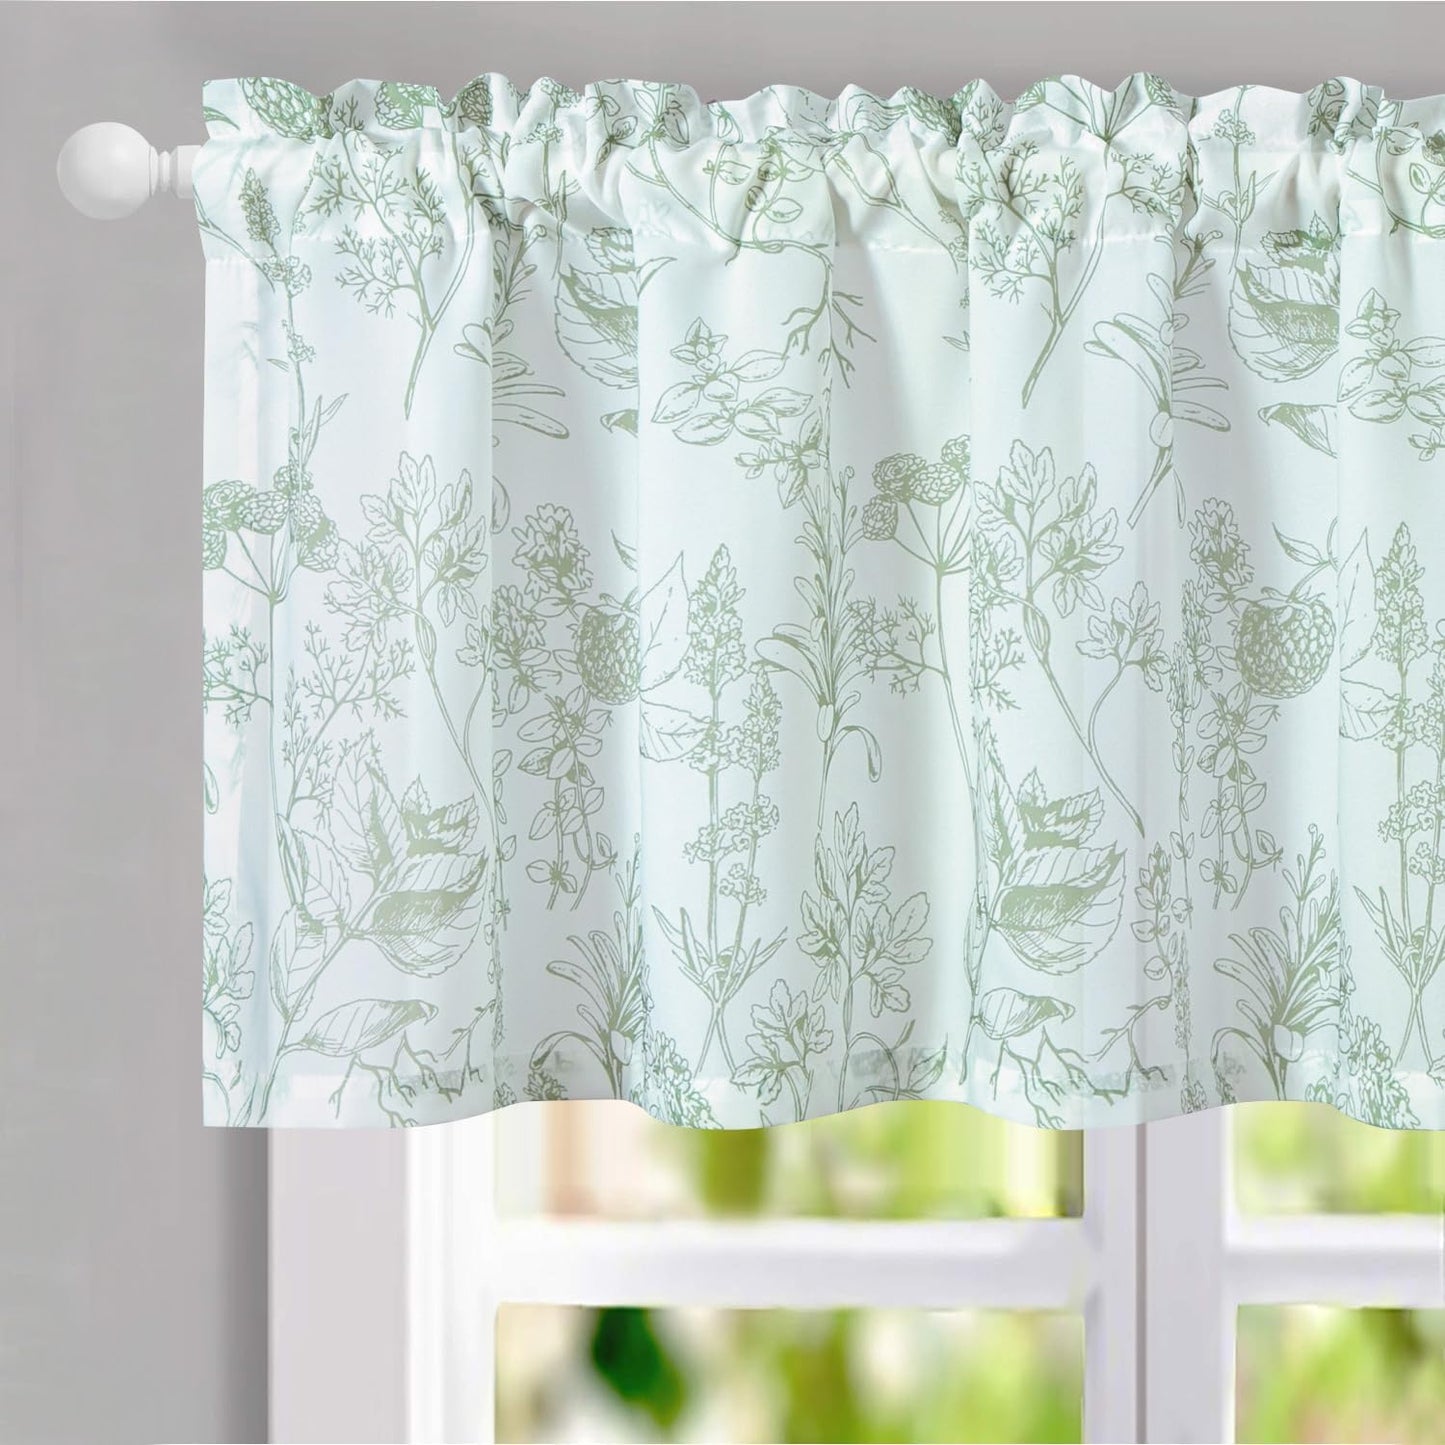 VOGOL Colorful Floral Print Tier Curtains, 2 Panels Smooth Textured Decorative Cafe Curtain, Rod Pocket Sheer Drapery for Farmhouse, W 30 X L 24  VOGOL Mn009 W52 X L18 